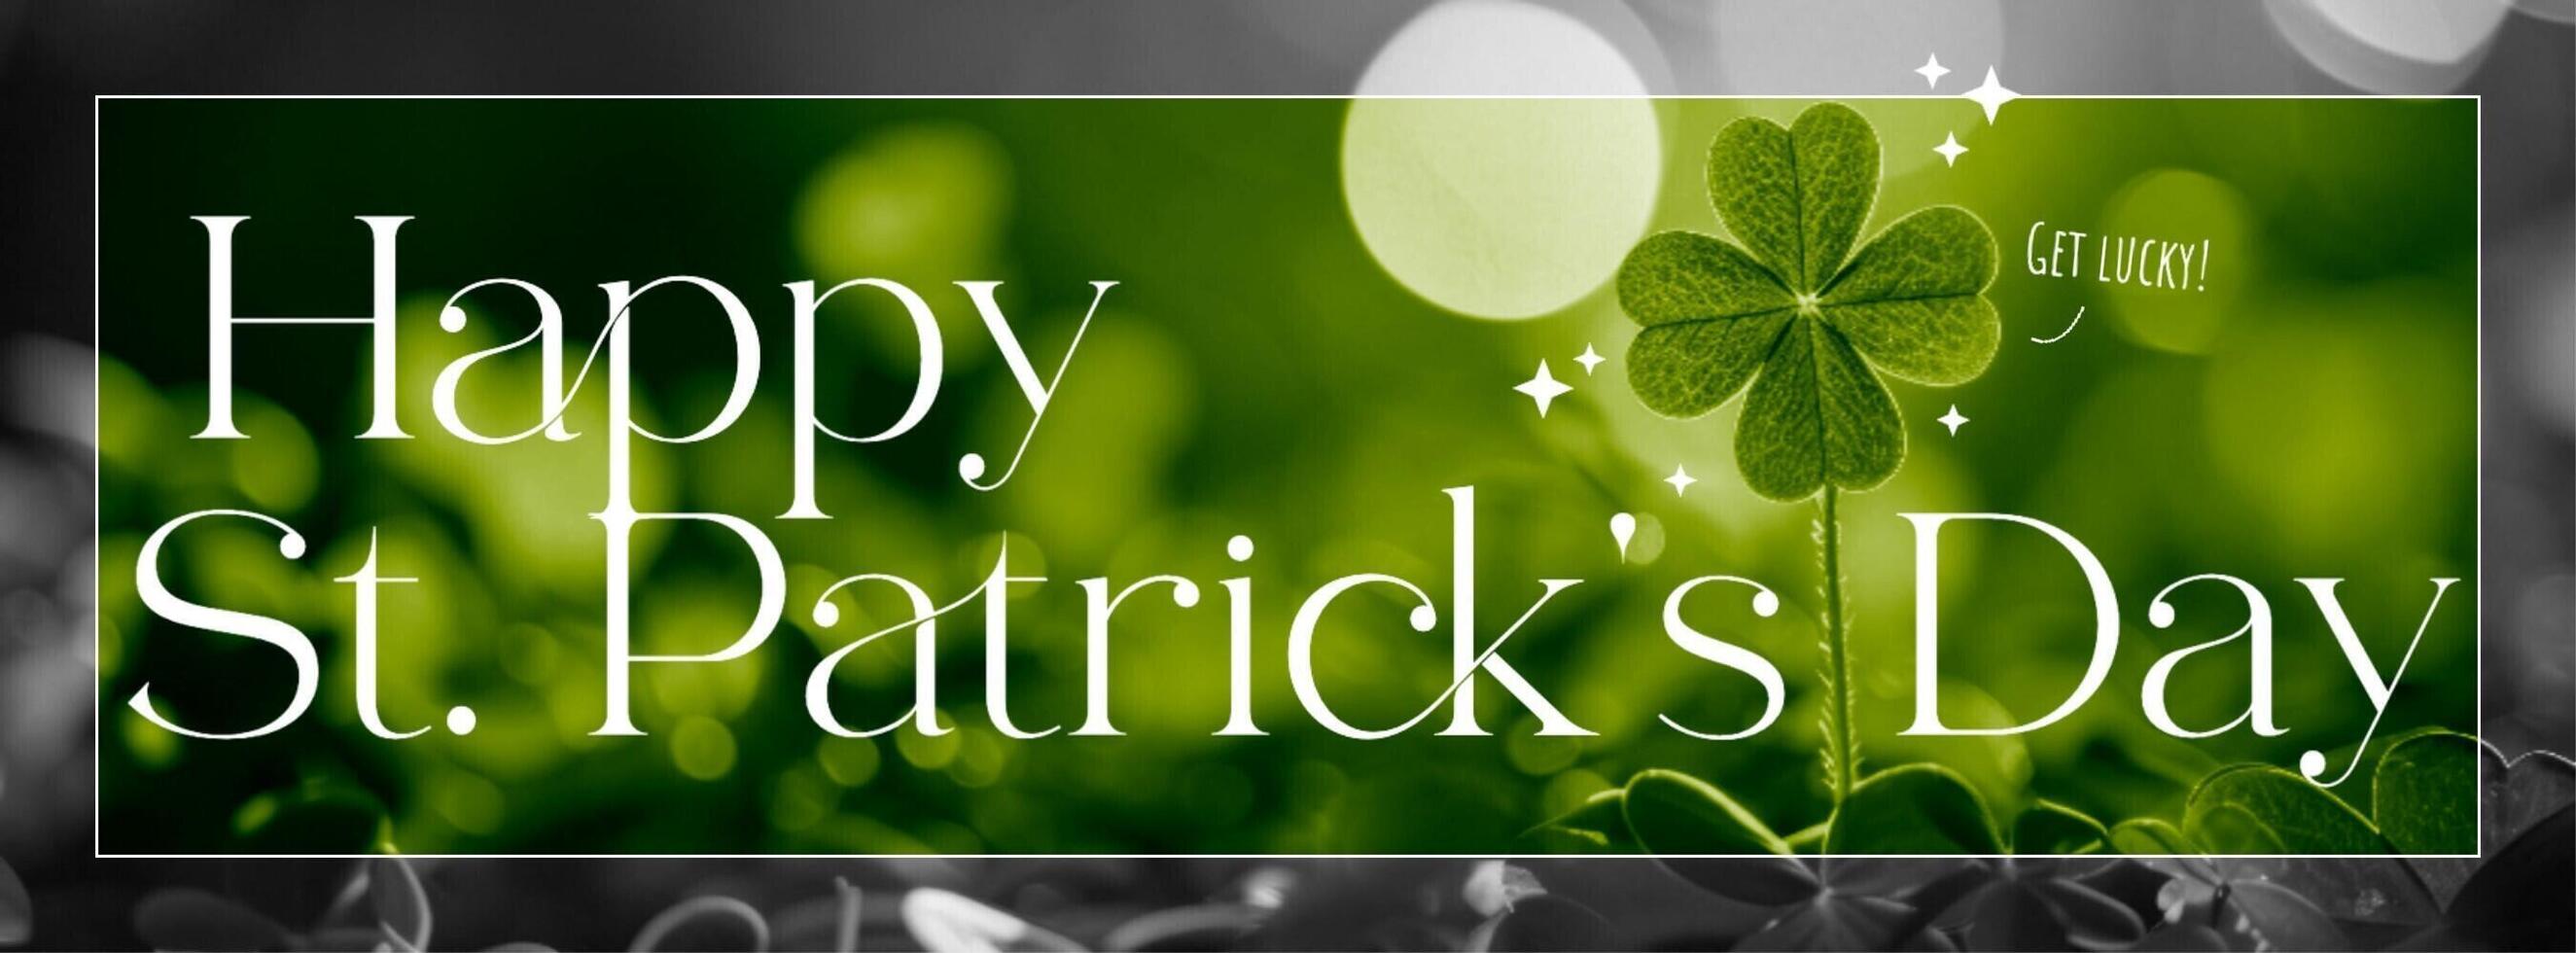 Happy St. Patrick's Day Greeting with Lucky Clover for Facebook Cover template